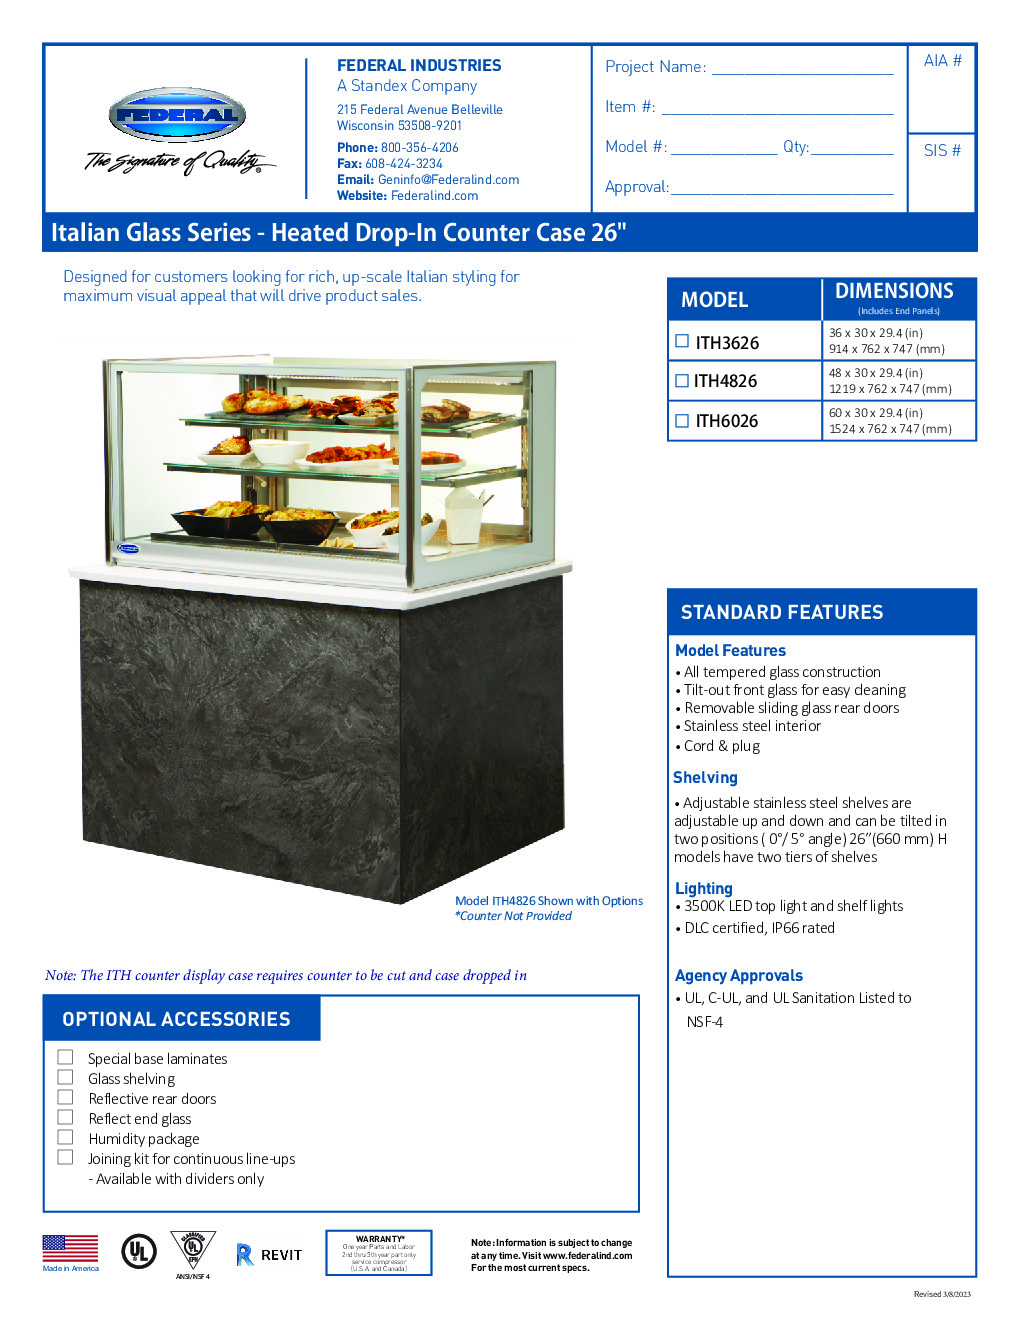 Federal Industries ITH3626 Drop-In Heated Display Case